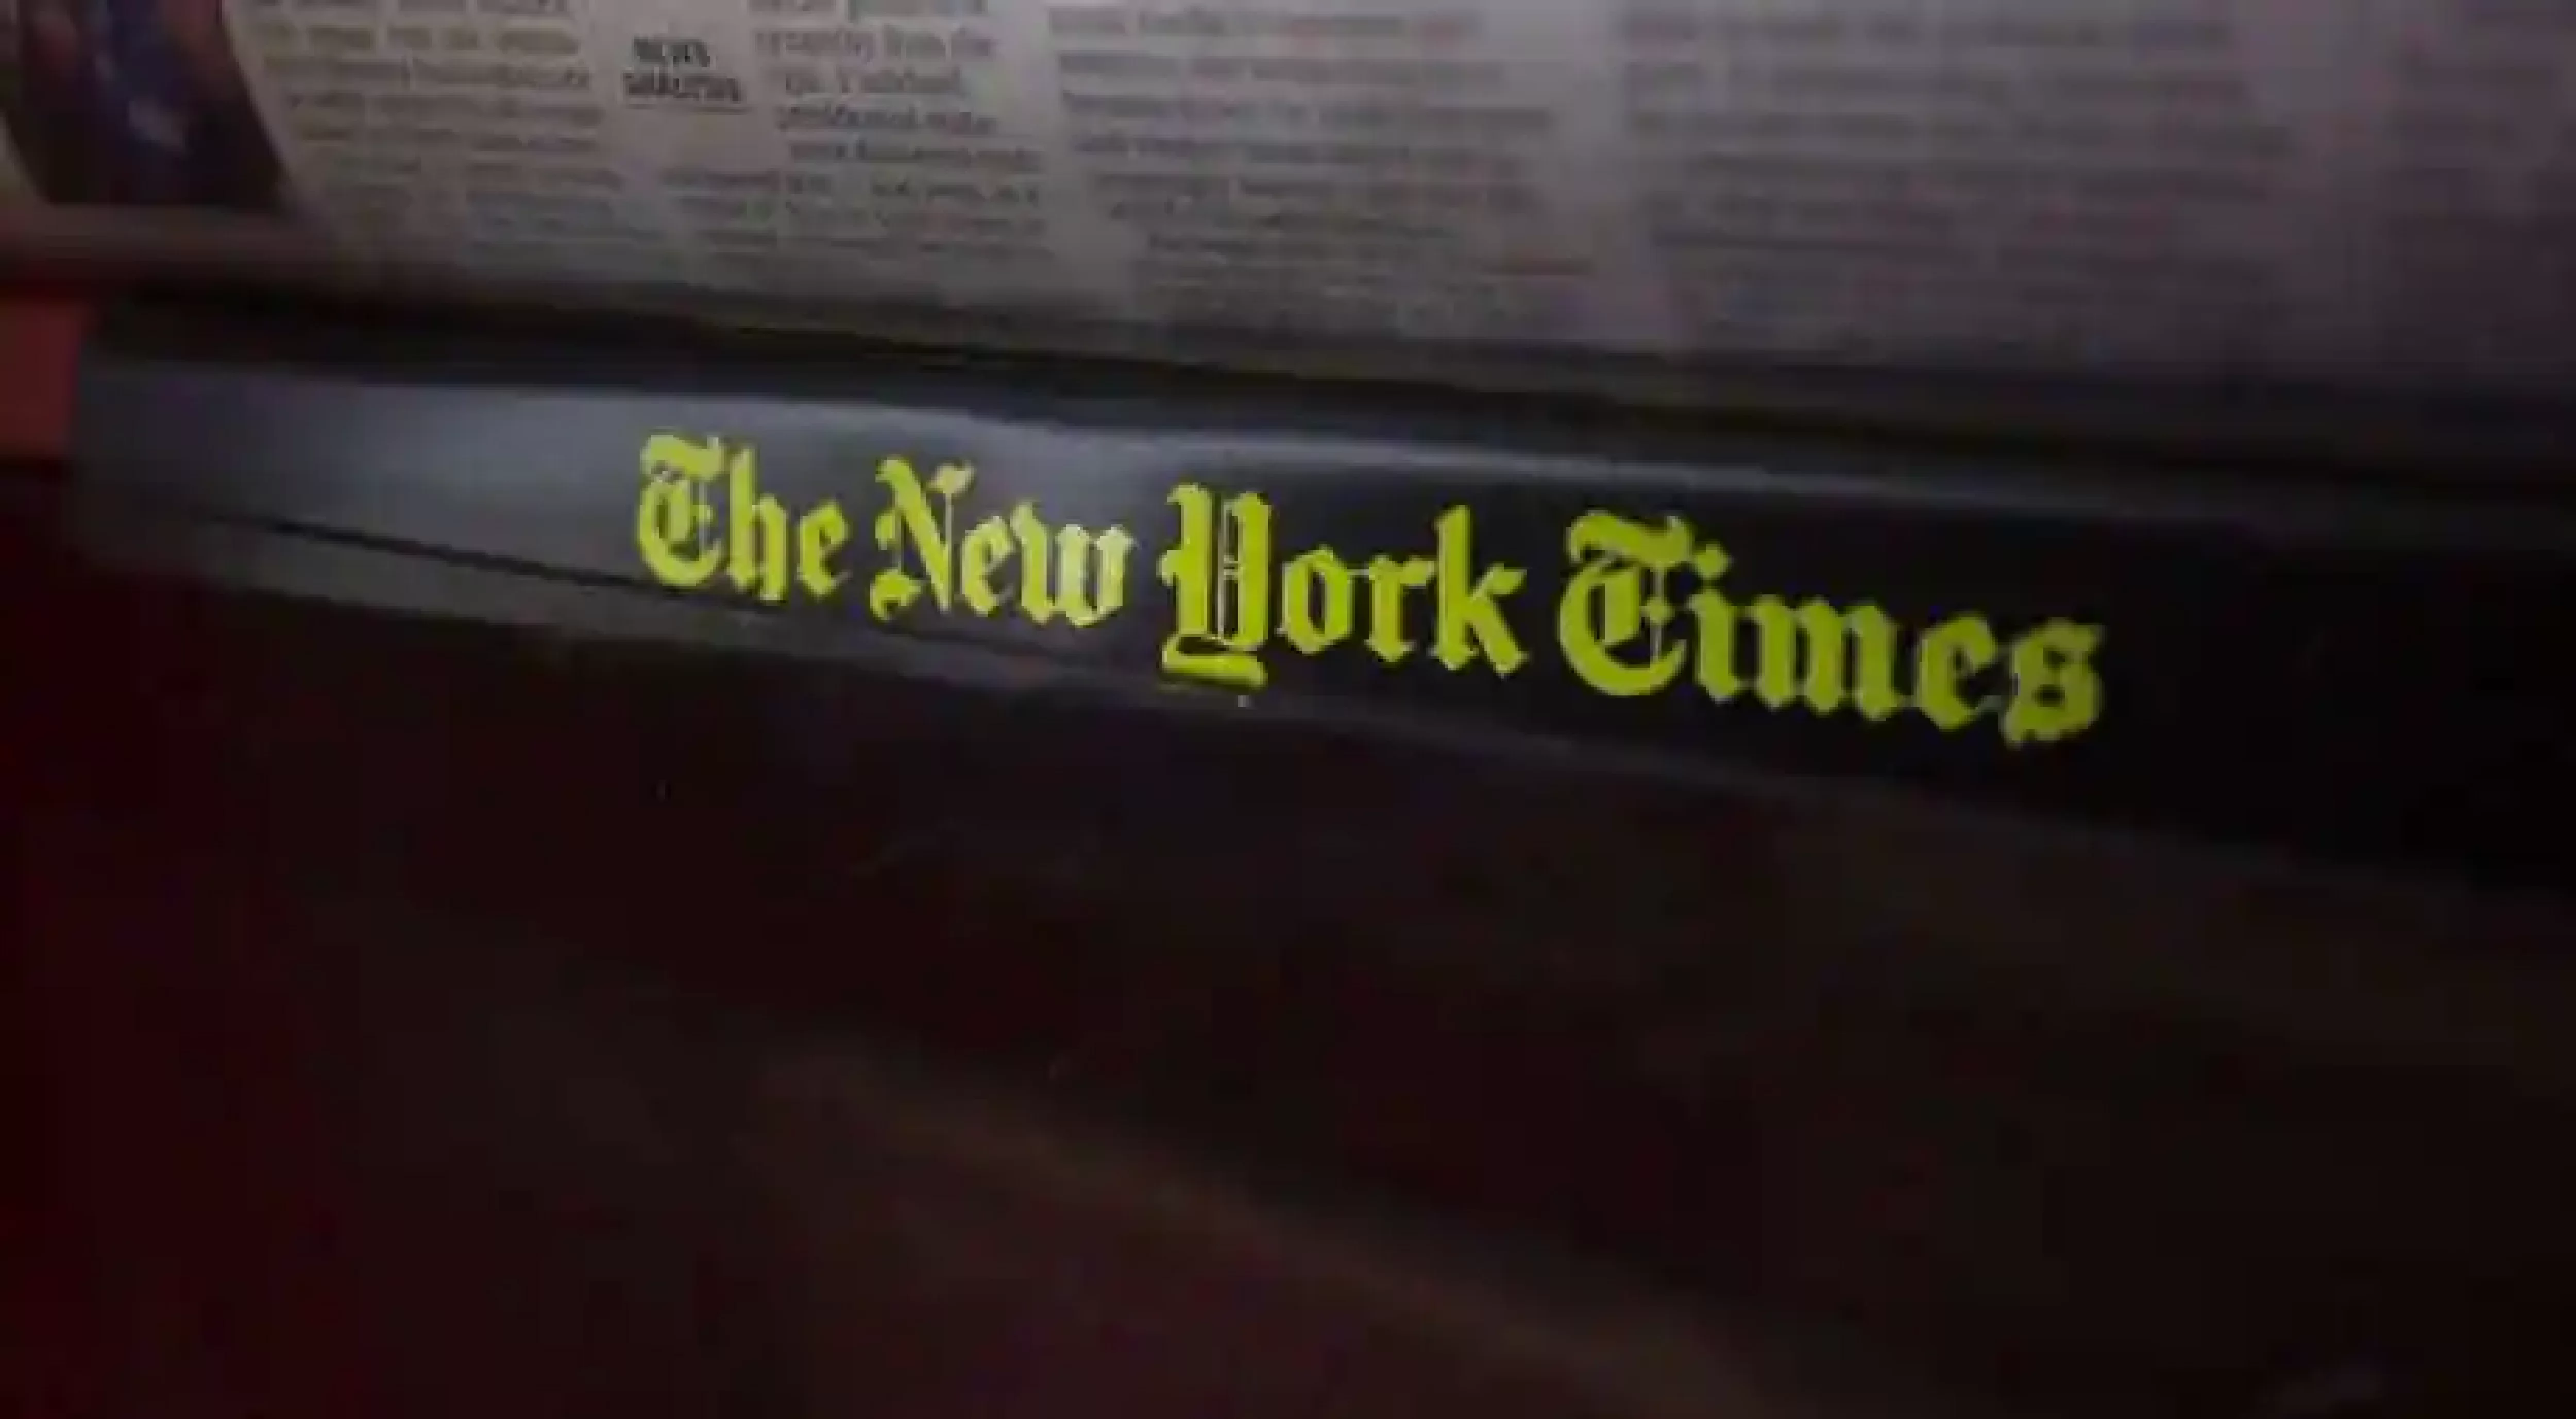 New York Times’ job ad has some critical remarks about India and its government